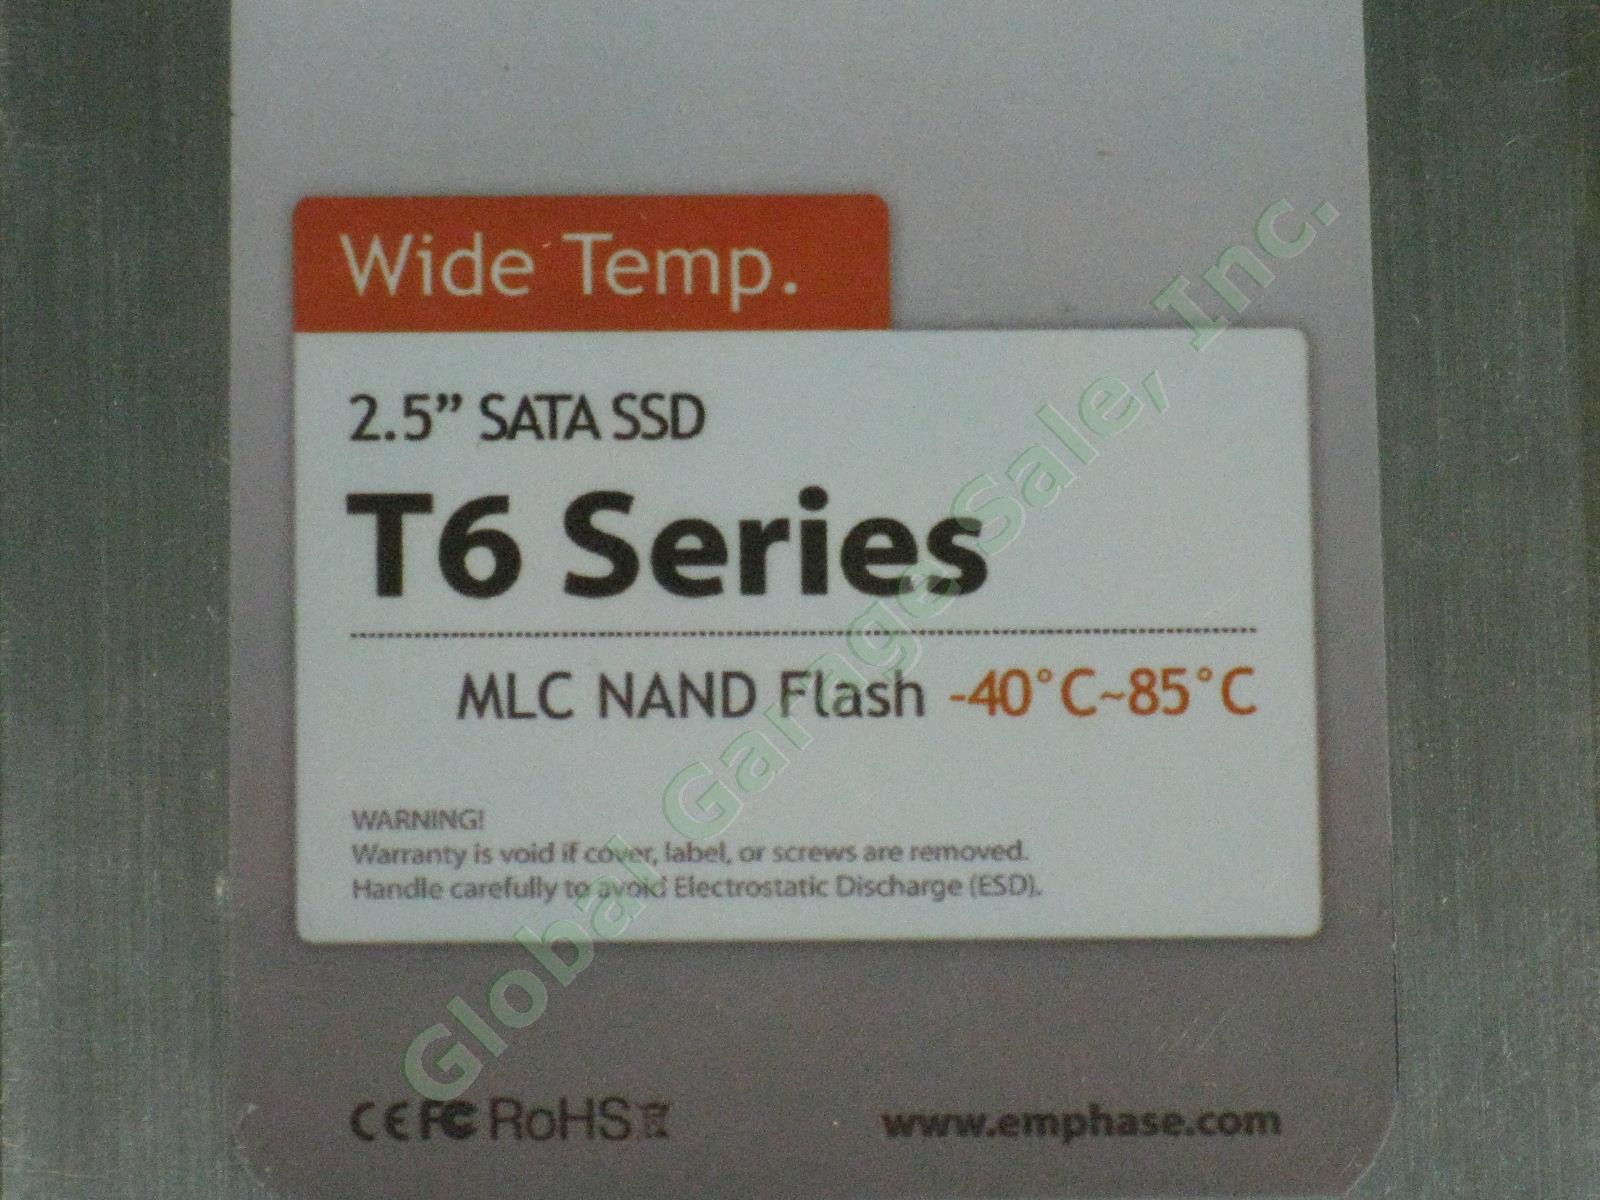 60 NEW Emphase T6 2.5" MLC NAND 60GB SSD Industrial Wide Temperature HDD Lot 2